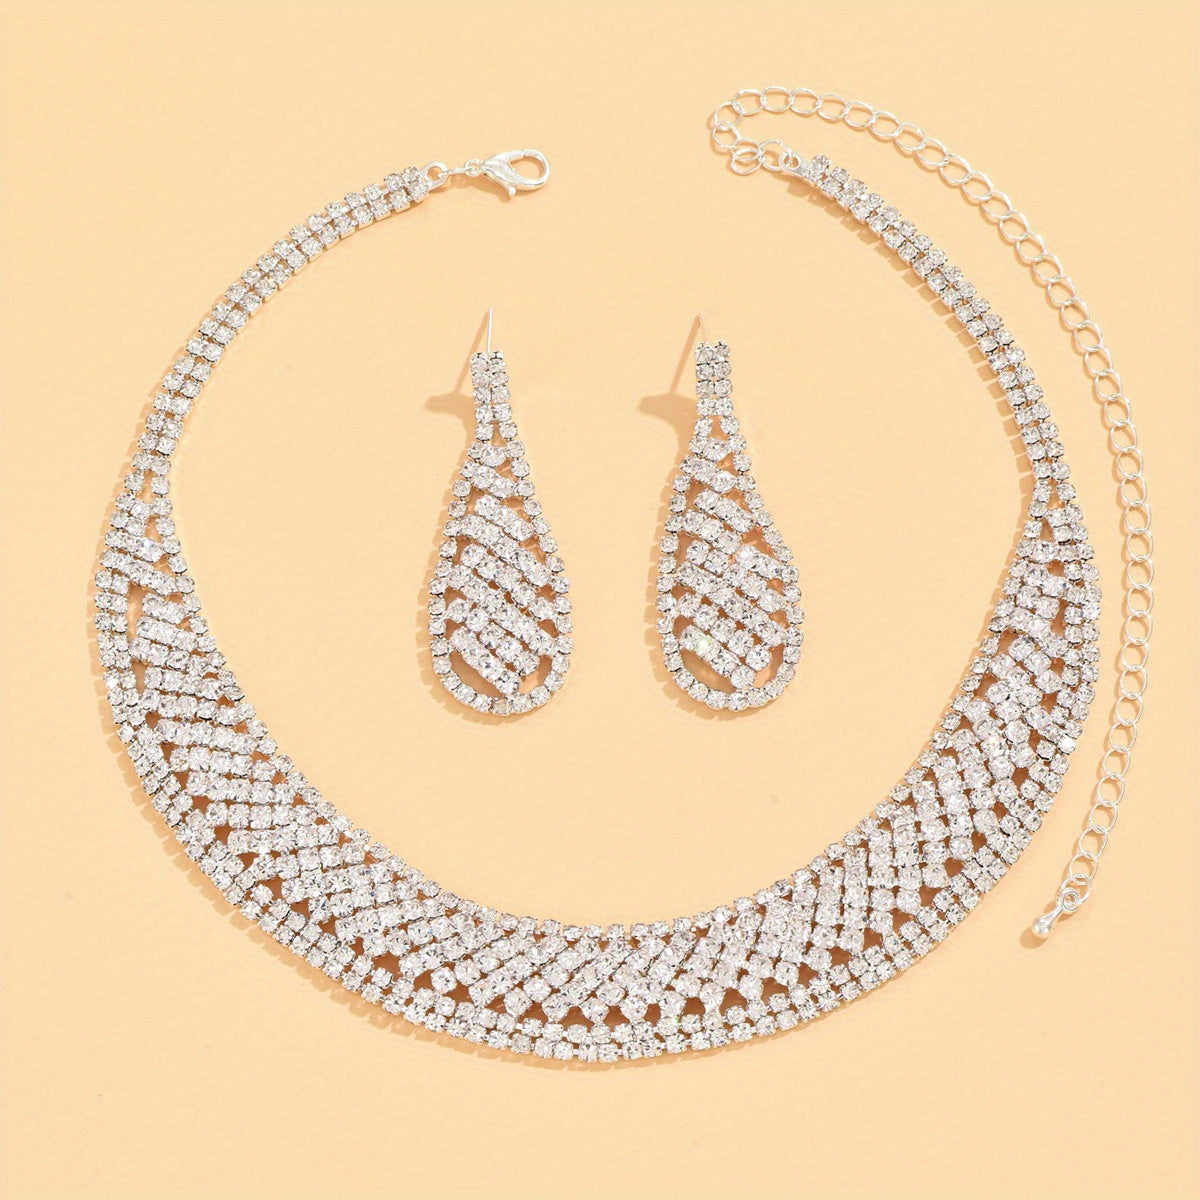 Sparkling Rhinestone Necklace and Earrings Set for Glamorous Occasions